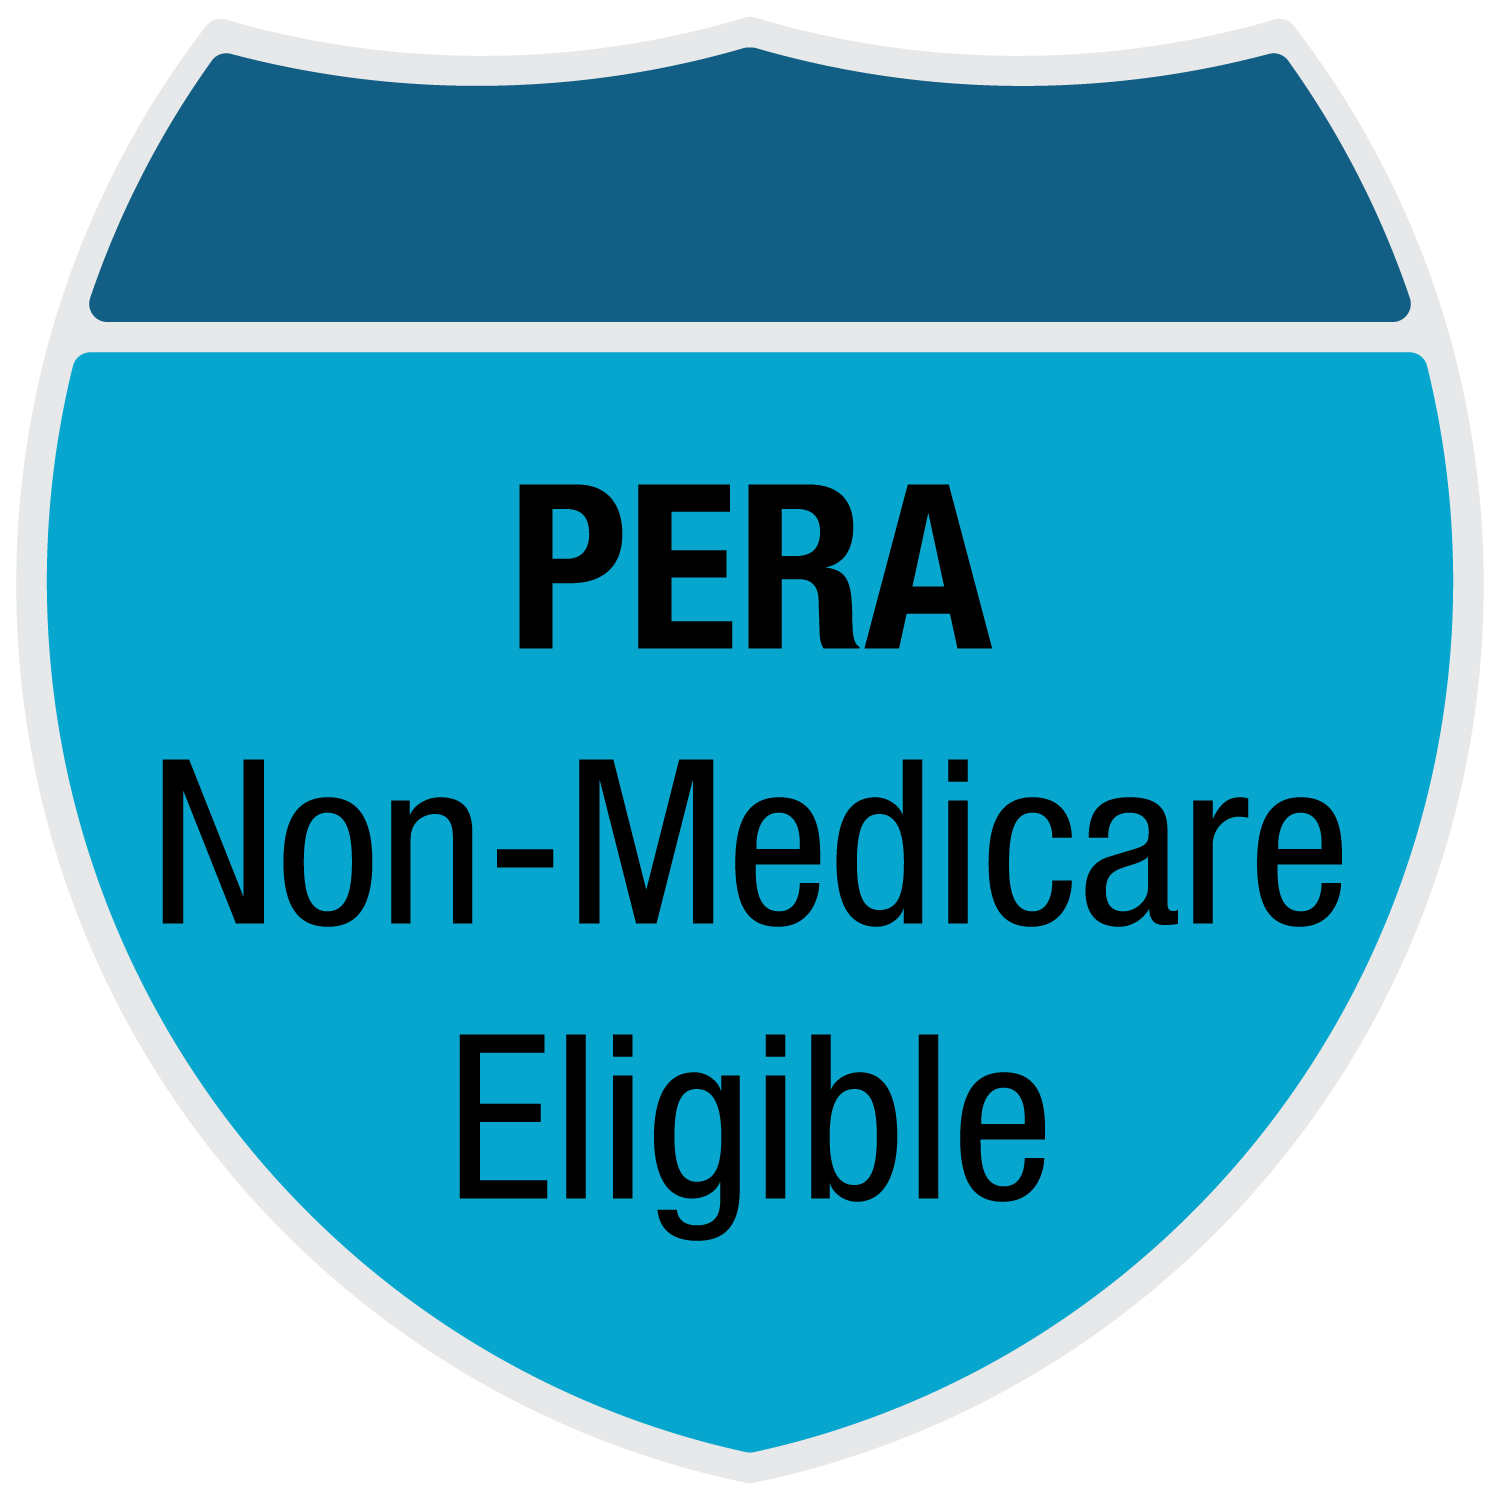 Click here if you are a PERA retiree who is not medicare eligible